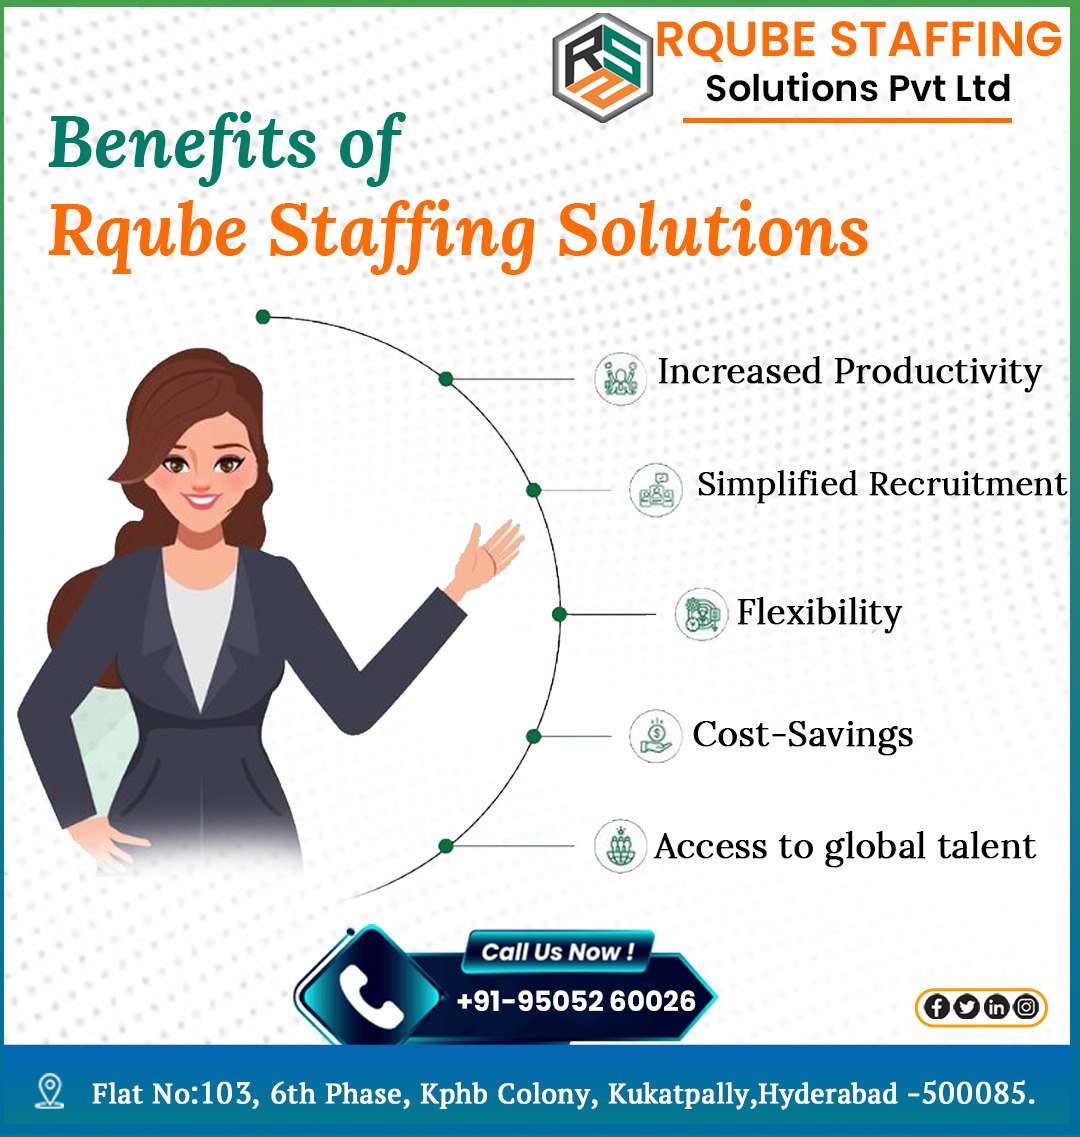 Benifits of Rqube Staffing Solutions 
contact :+91 92469 19009
#rqubestaffing #beststaffingagency #Rqube #bestservuiceprovider
#staffingagency #flexibility #beststaffingnetwork #Rqubeprivatelimited #costsaving #beststaffingneeds